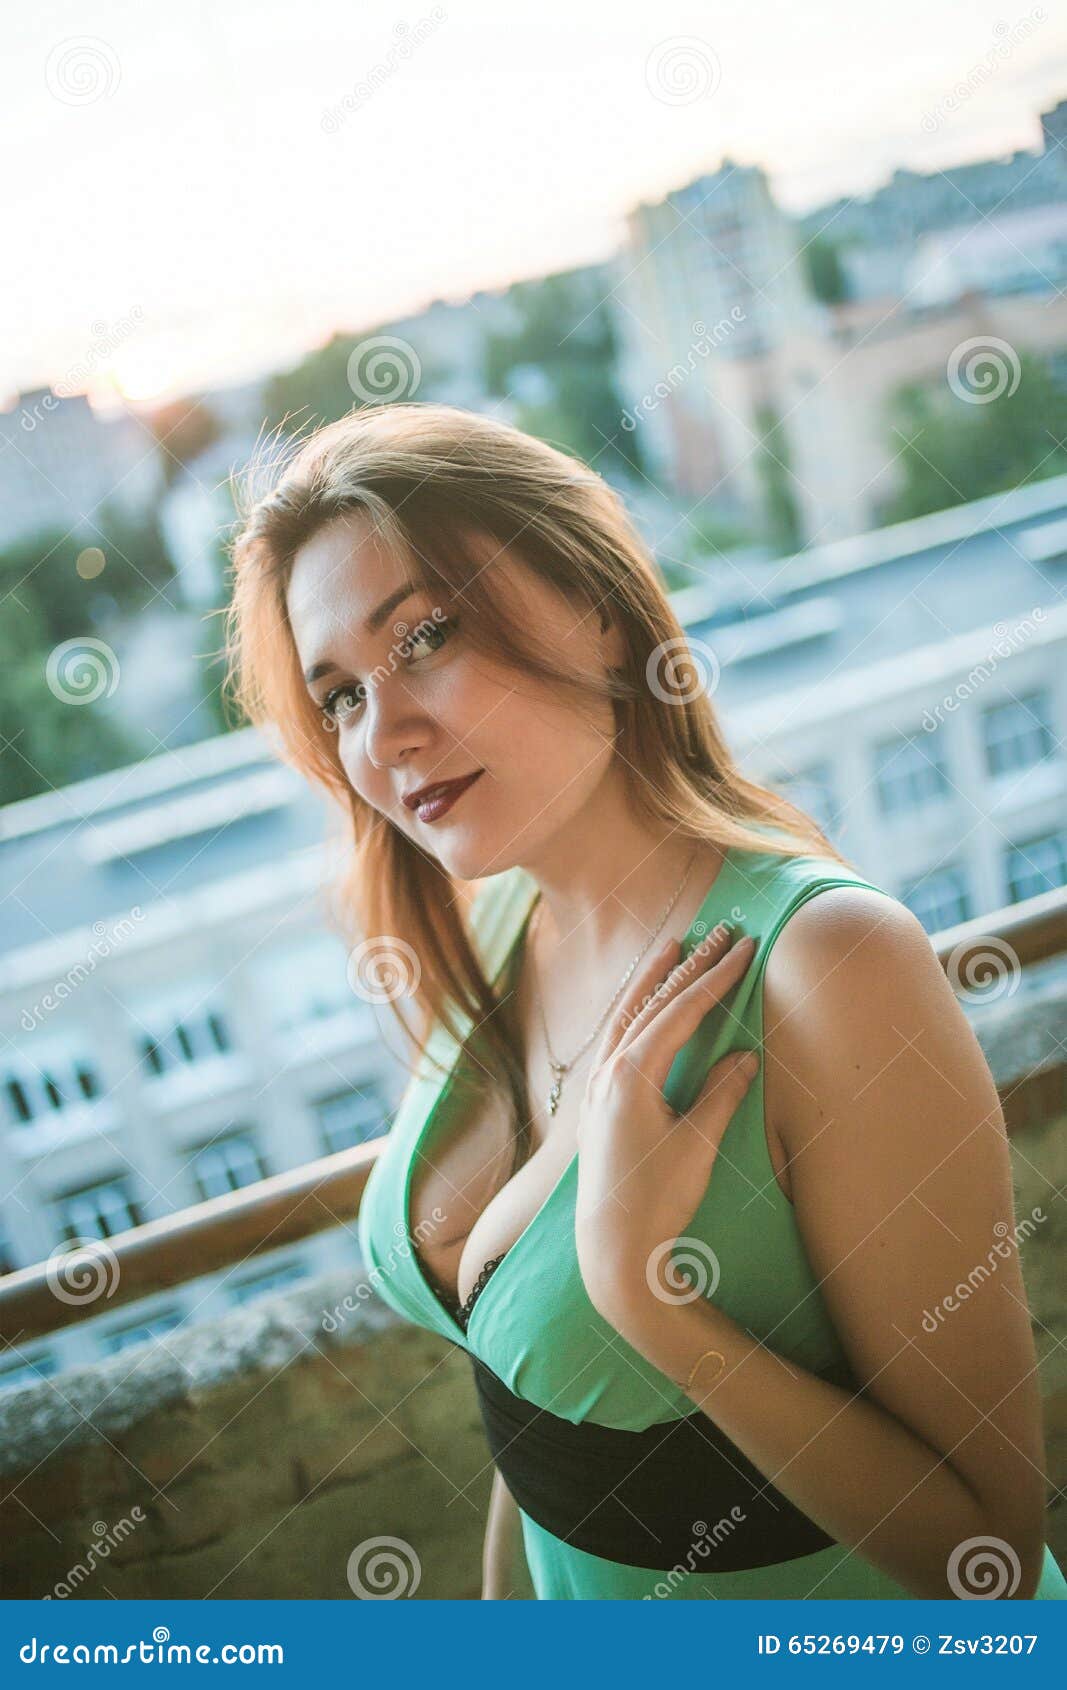 Young Beautiful Busty Girl in the Green Dress with Stock Image ...